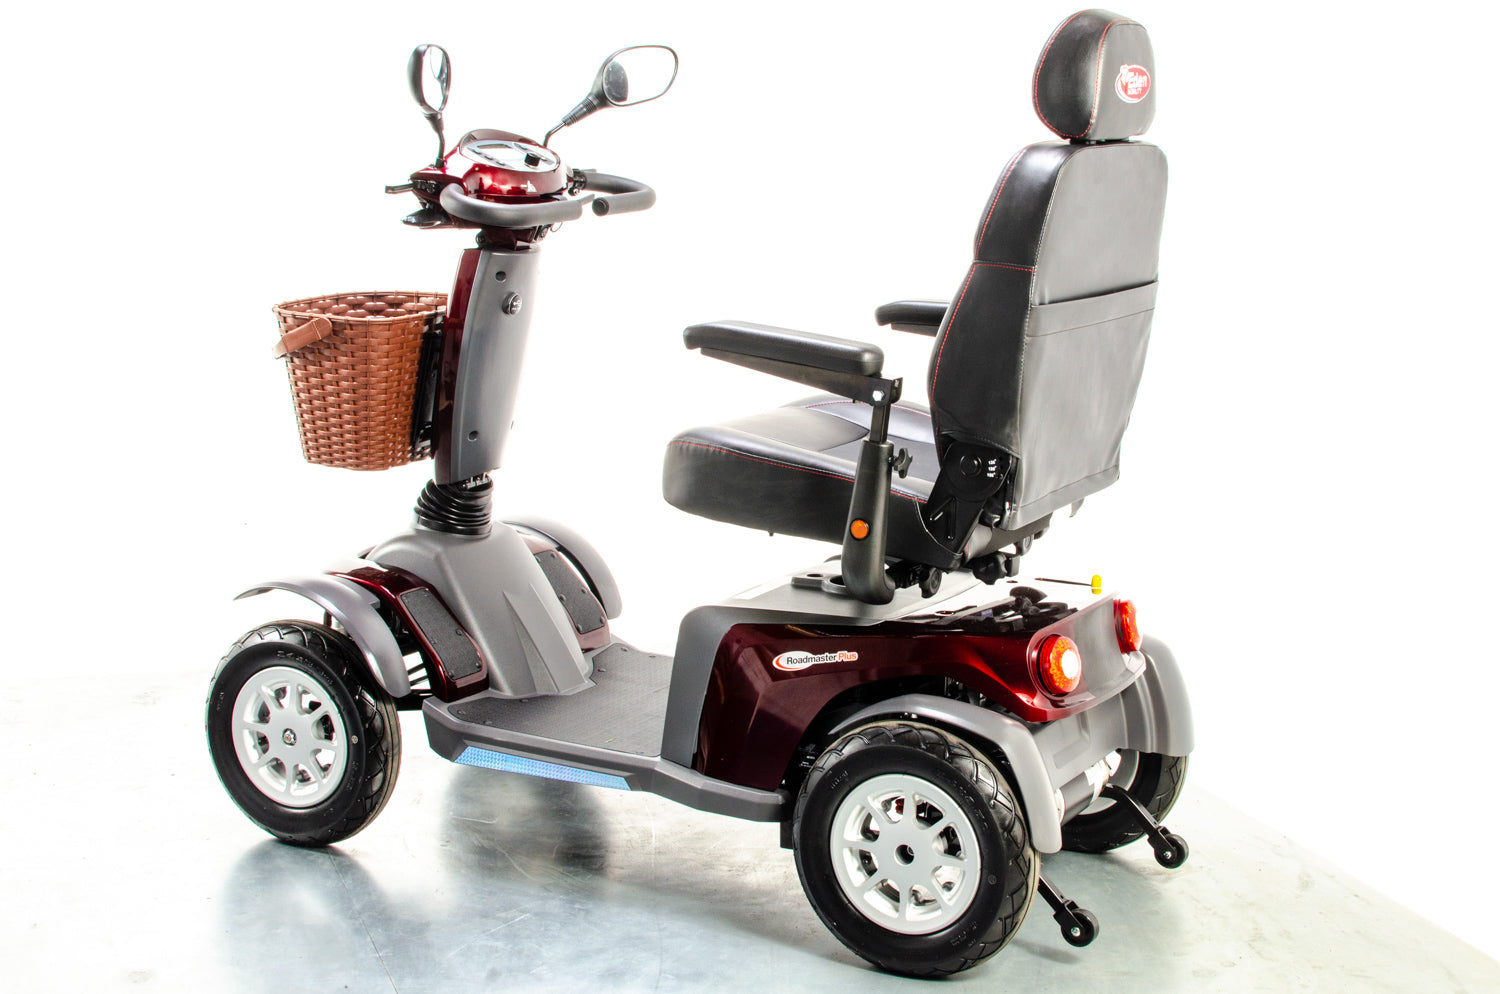 2020 Eden Roadmaster Plus Used Mobility Scooter 8mph Large All Terrain Luxury Electric